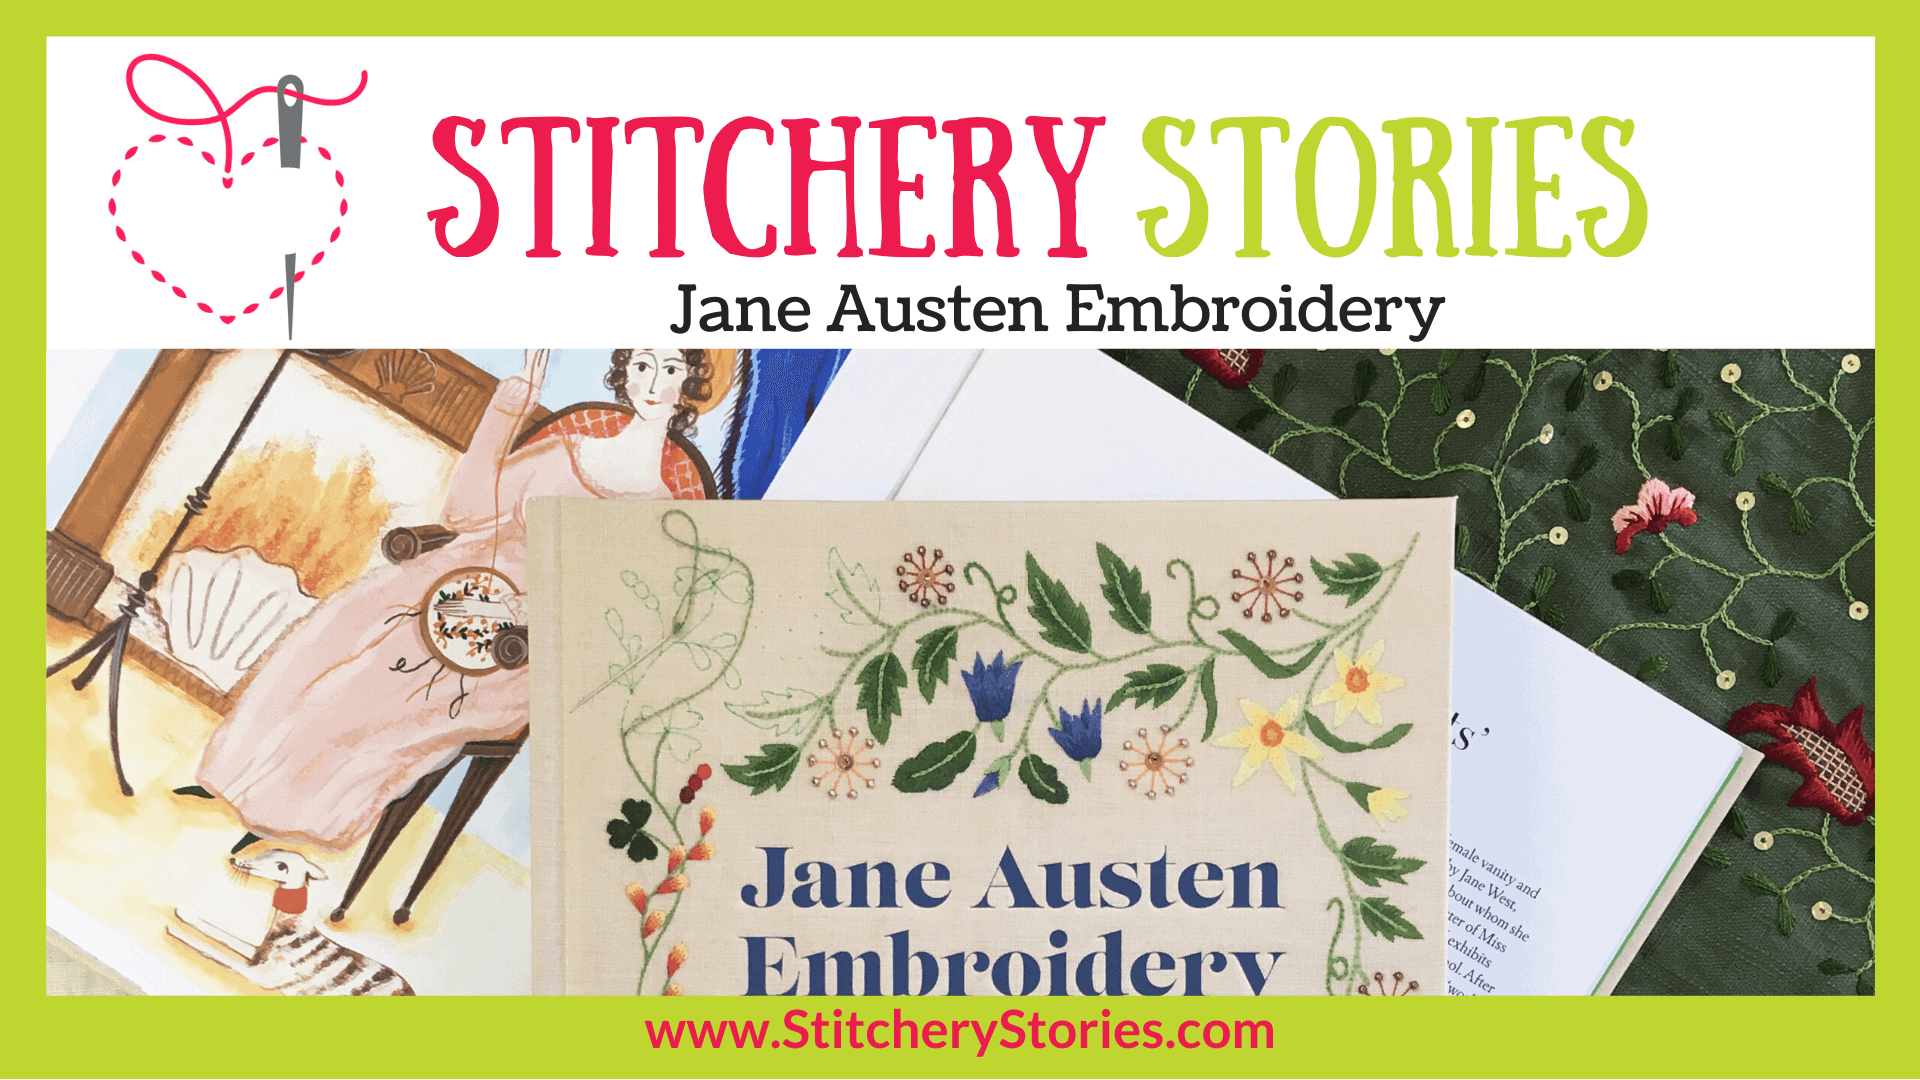 Jane Austen Embroidery guest Stitchery Stories embroidery podcast